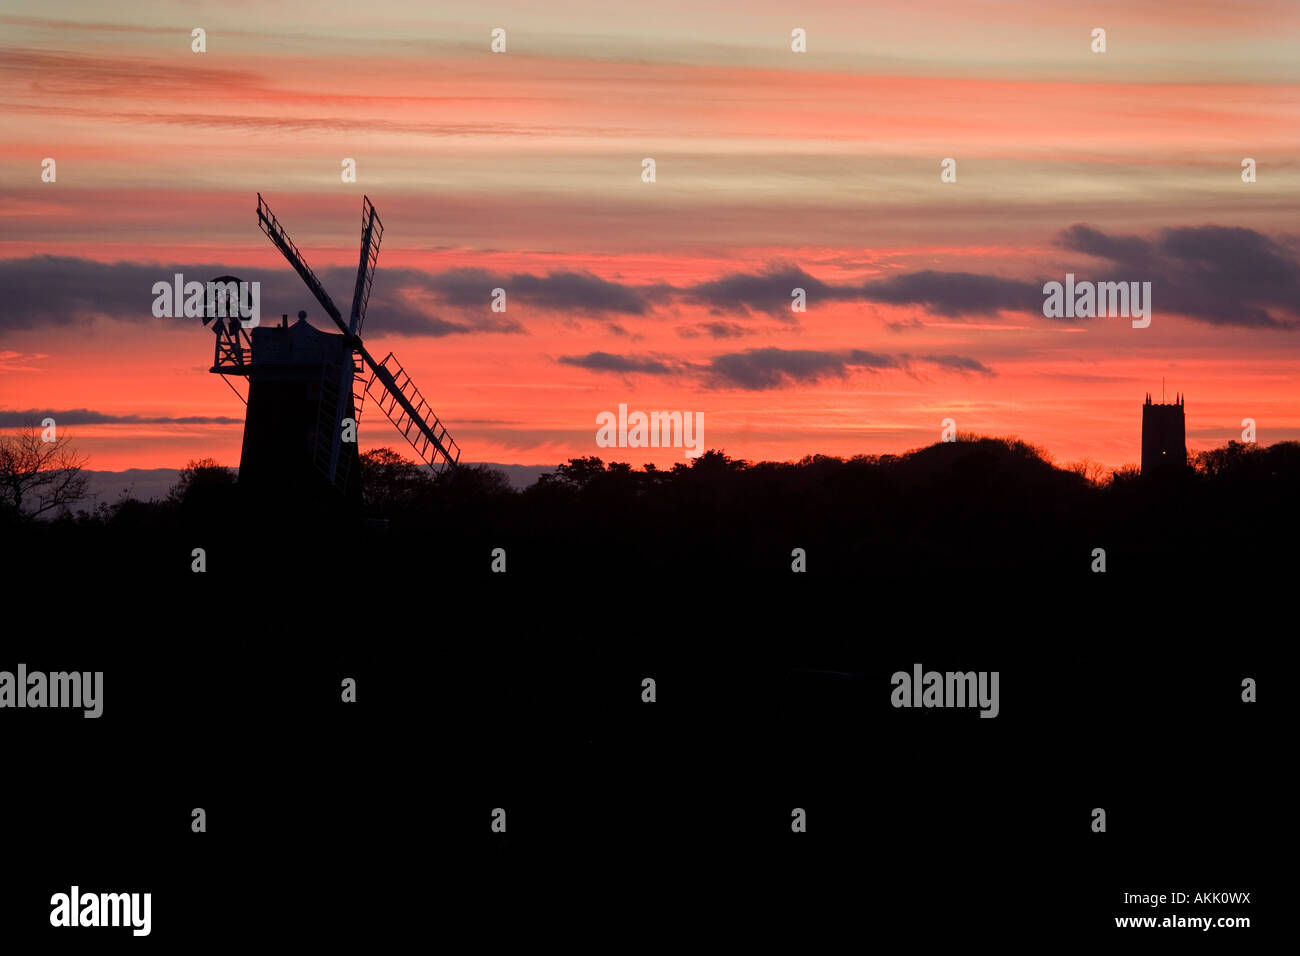 Cley windmill and marshes  on the north Norfolk coast in Winter UK Stock Photo